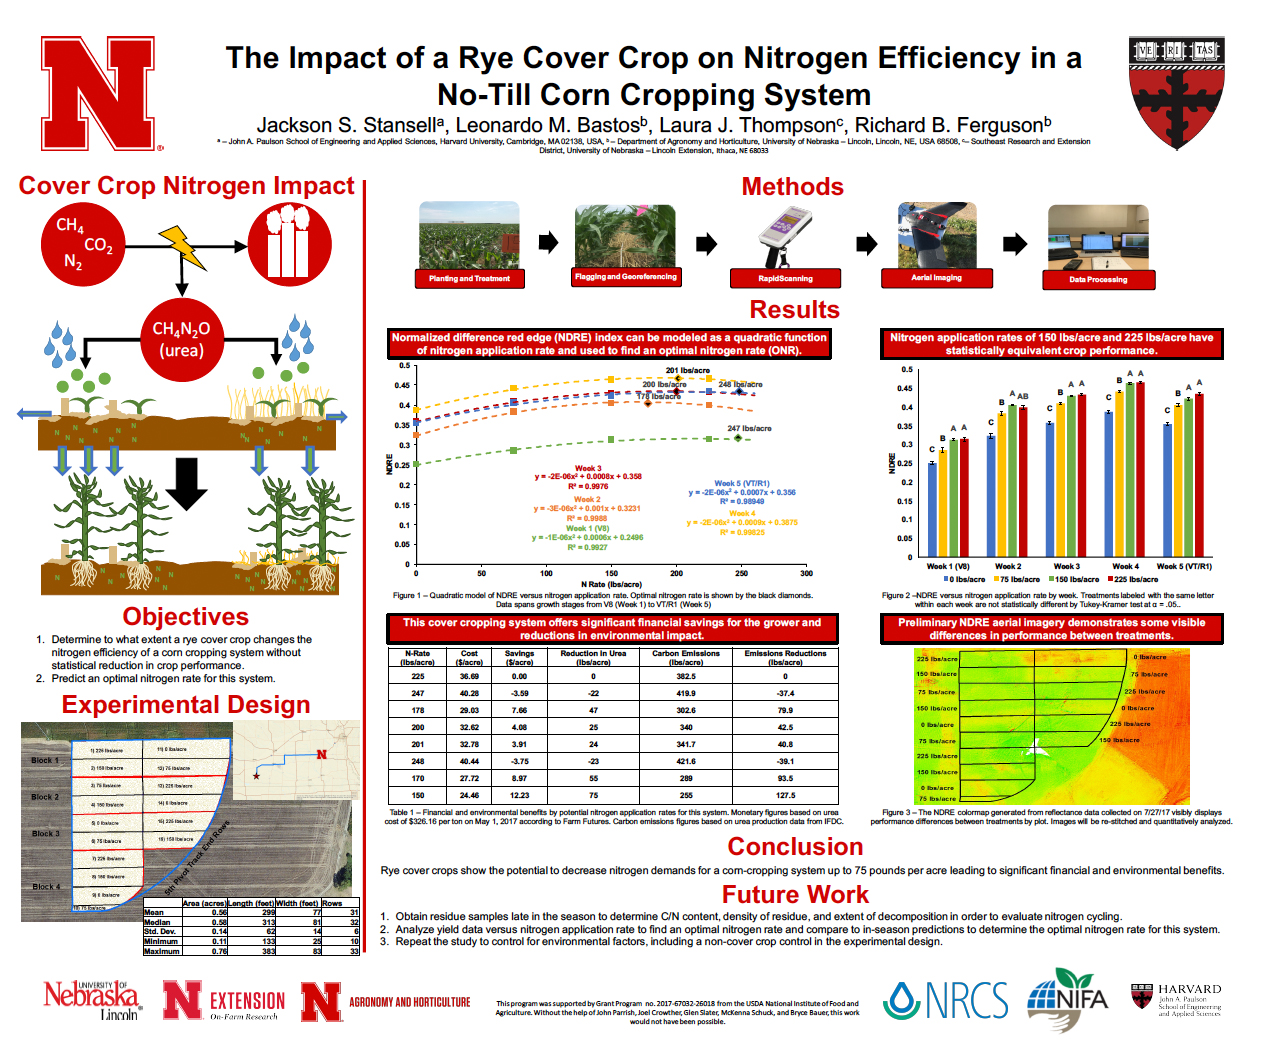 The Impact of a Rye Cover Crop on Nitrogen Efficiency in a No-Till Corn Cropping System poster